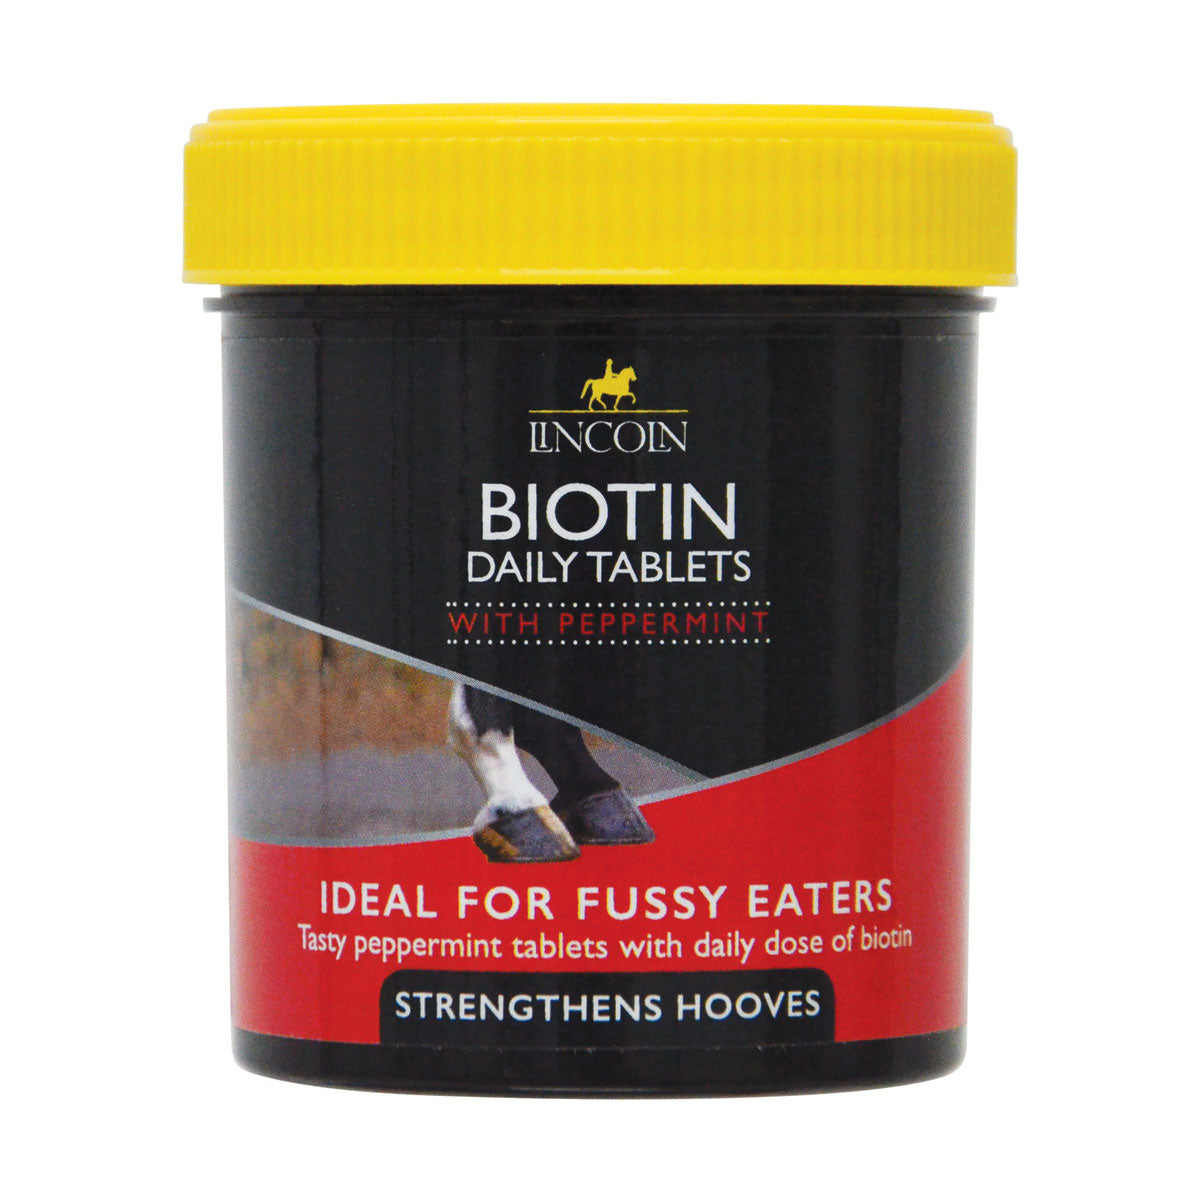 Lincoln Biotin Tablets for Horse Hoof Health